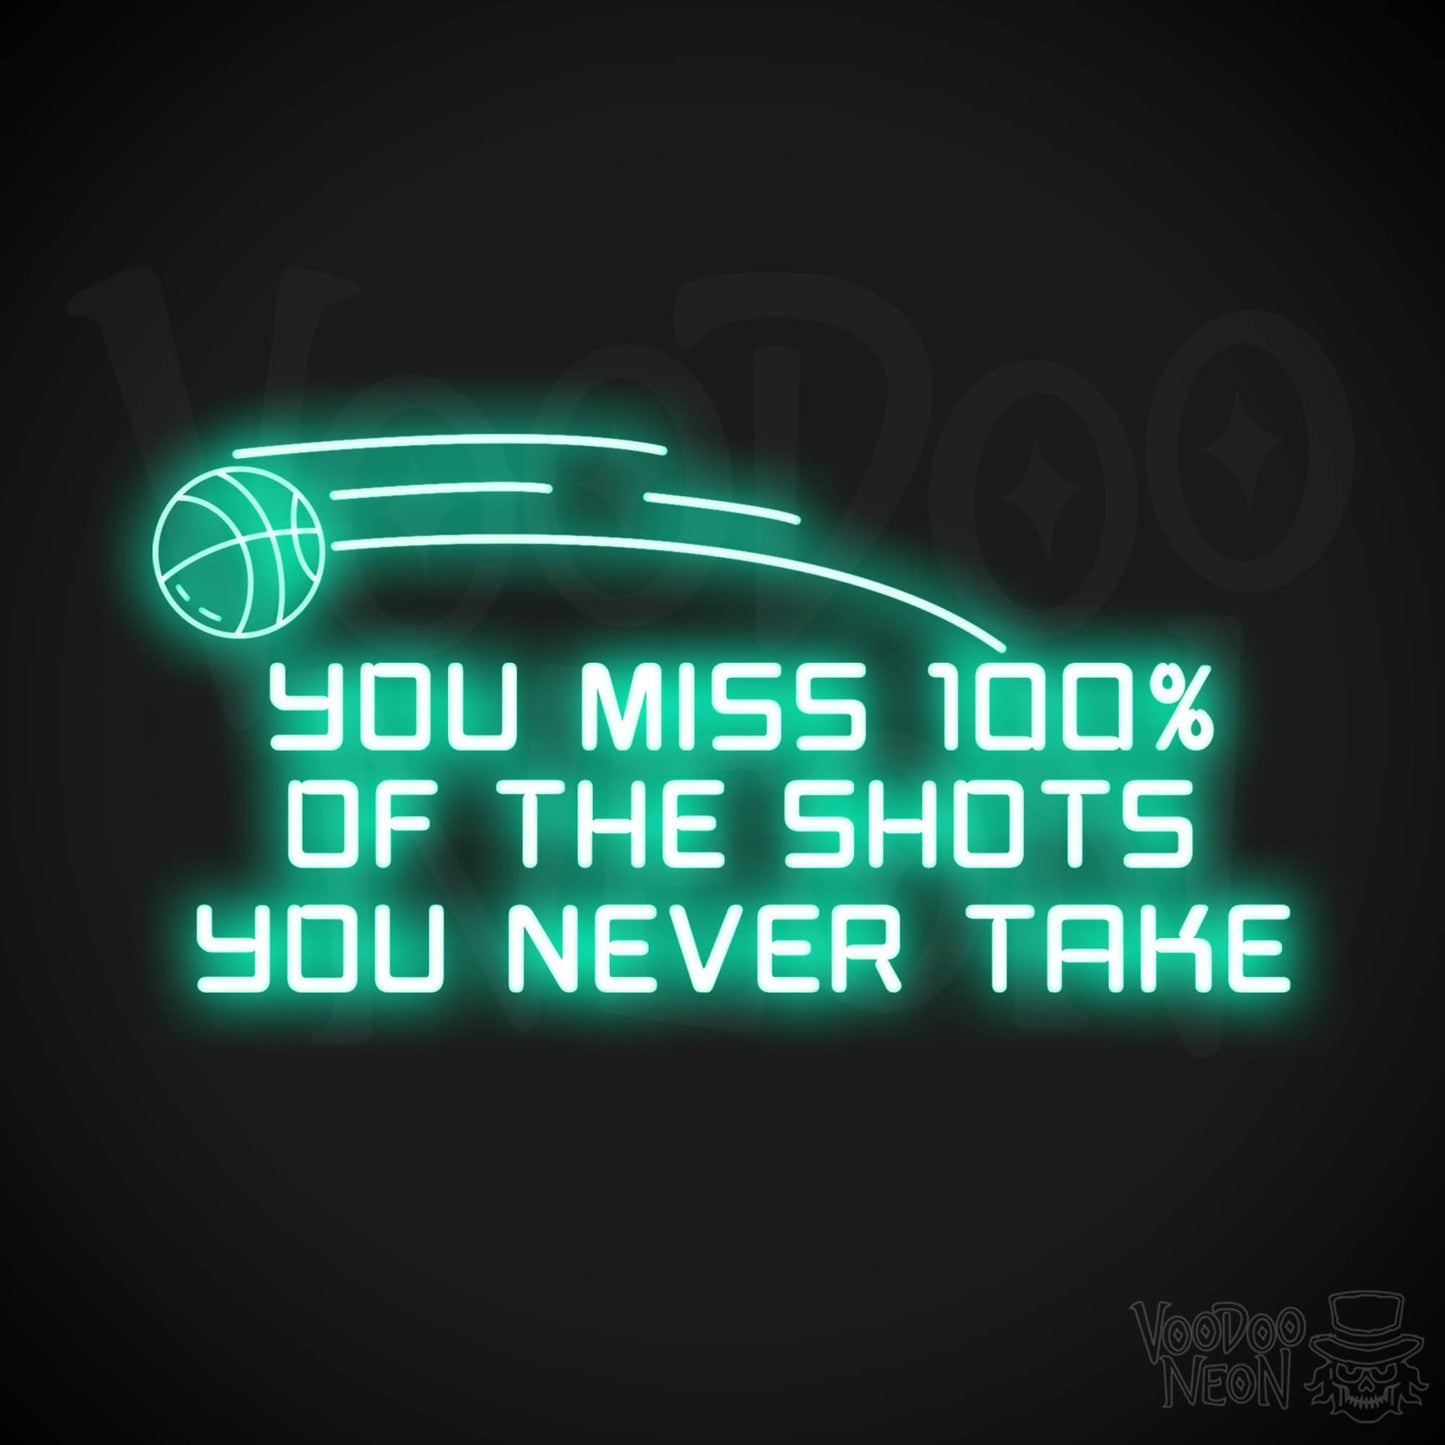 You Miss 100% of the Shots You Never Take Neon Sign - Neon Wall Art - Inspirational Signs - Color Light Green